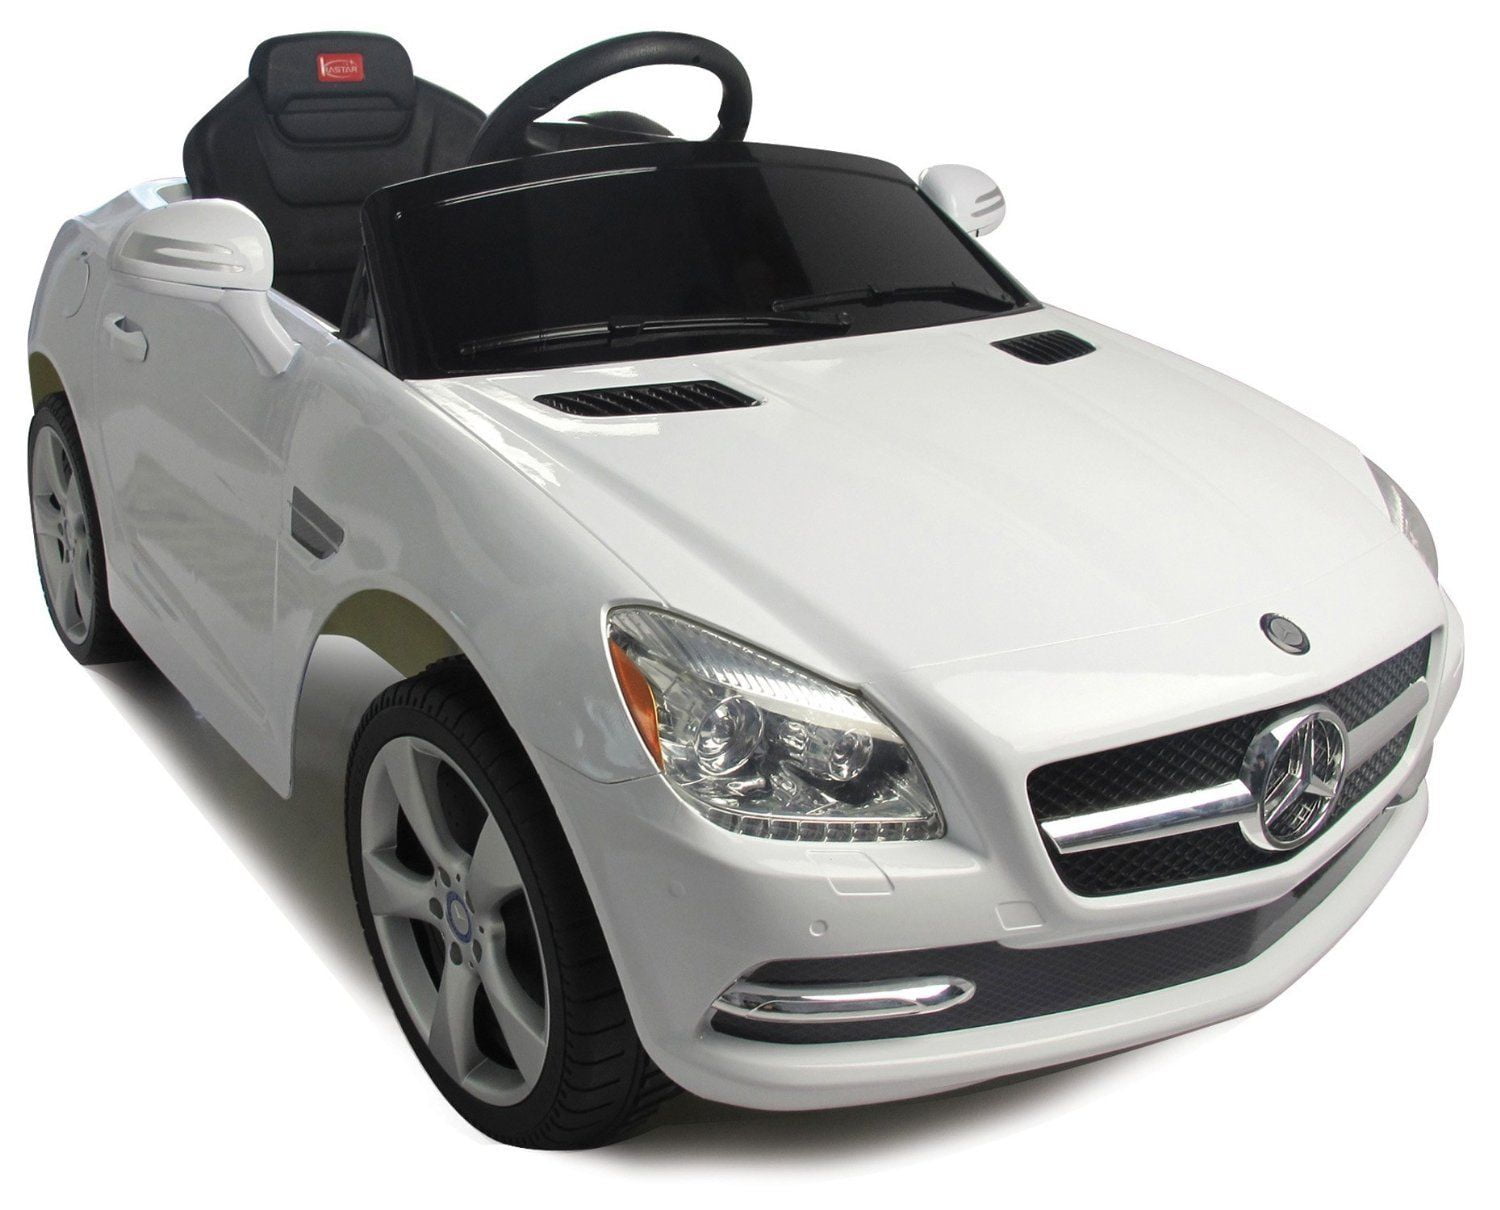 Brand New Electric Mercedes Benz SLS AMG 6V Ride On Car White RRP £199.99 